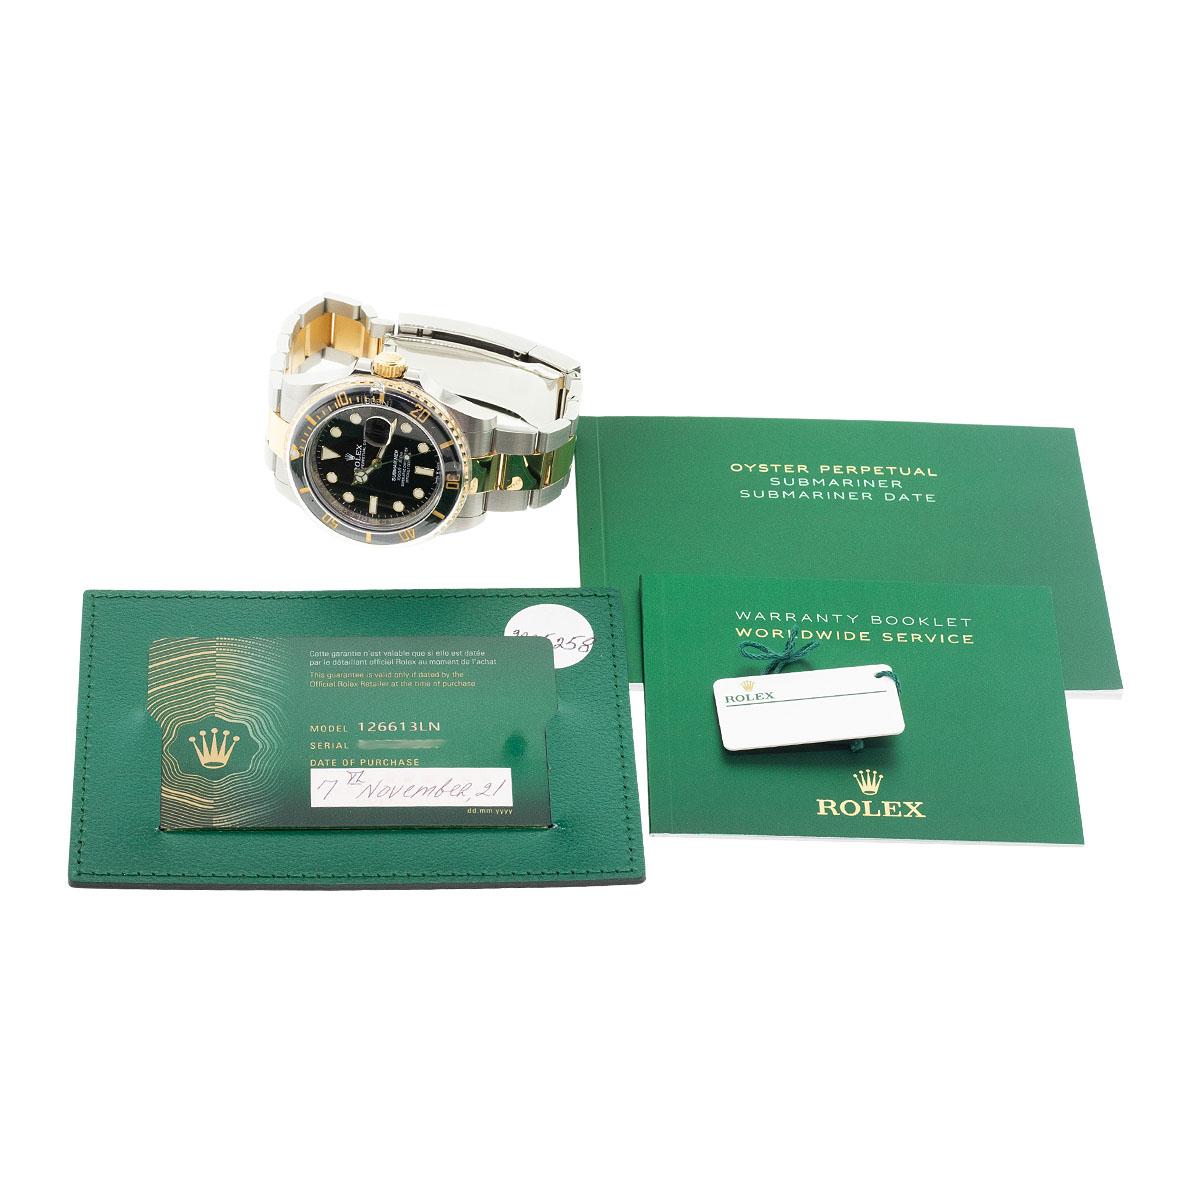 Rolex 126613LN Submariner Two Tone Black Dial Watch For Sale 1